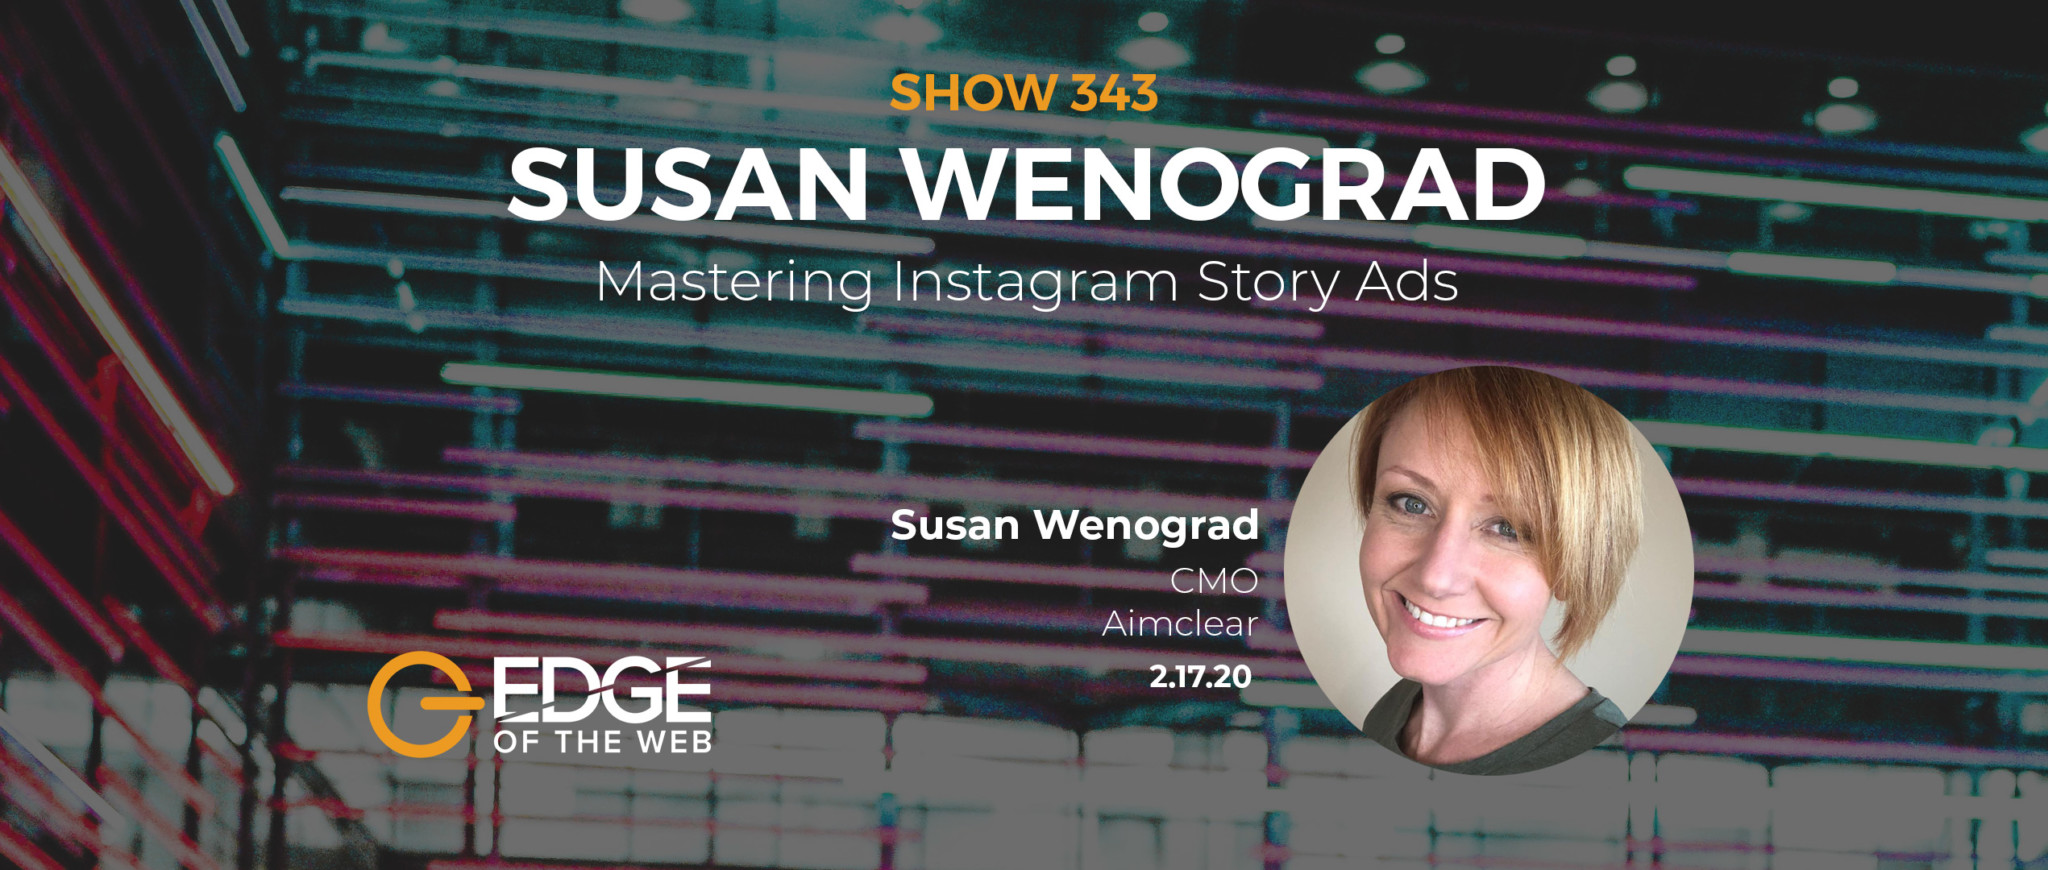 Show 343: Mastering Instagram Story Ads, featuring Susan Wenograd